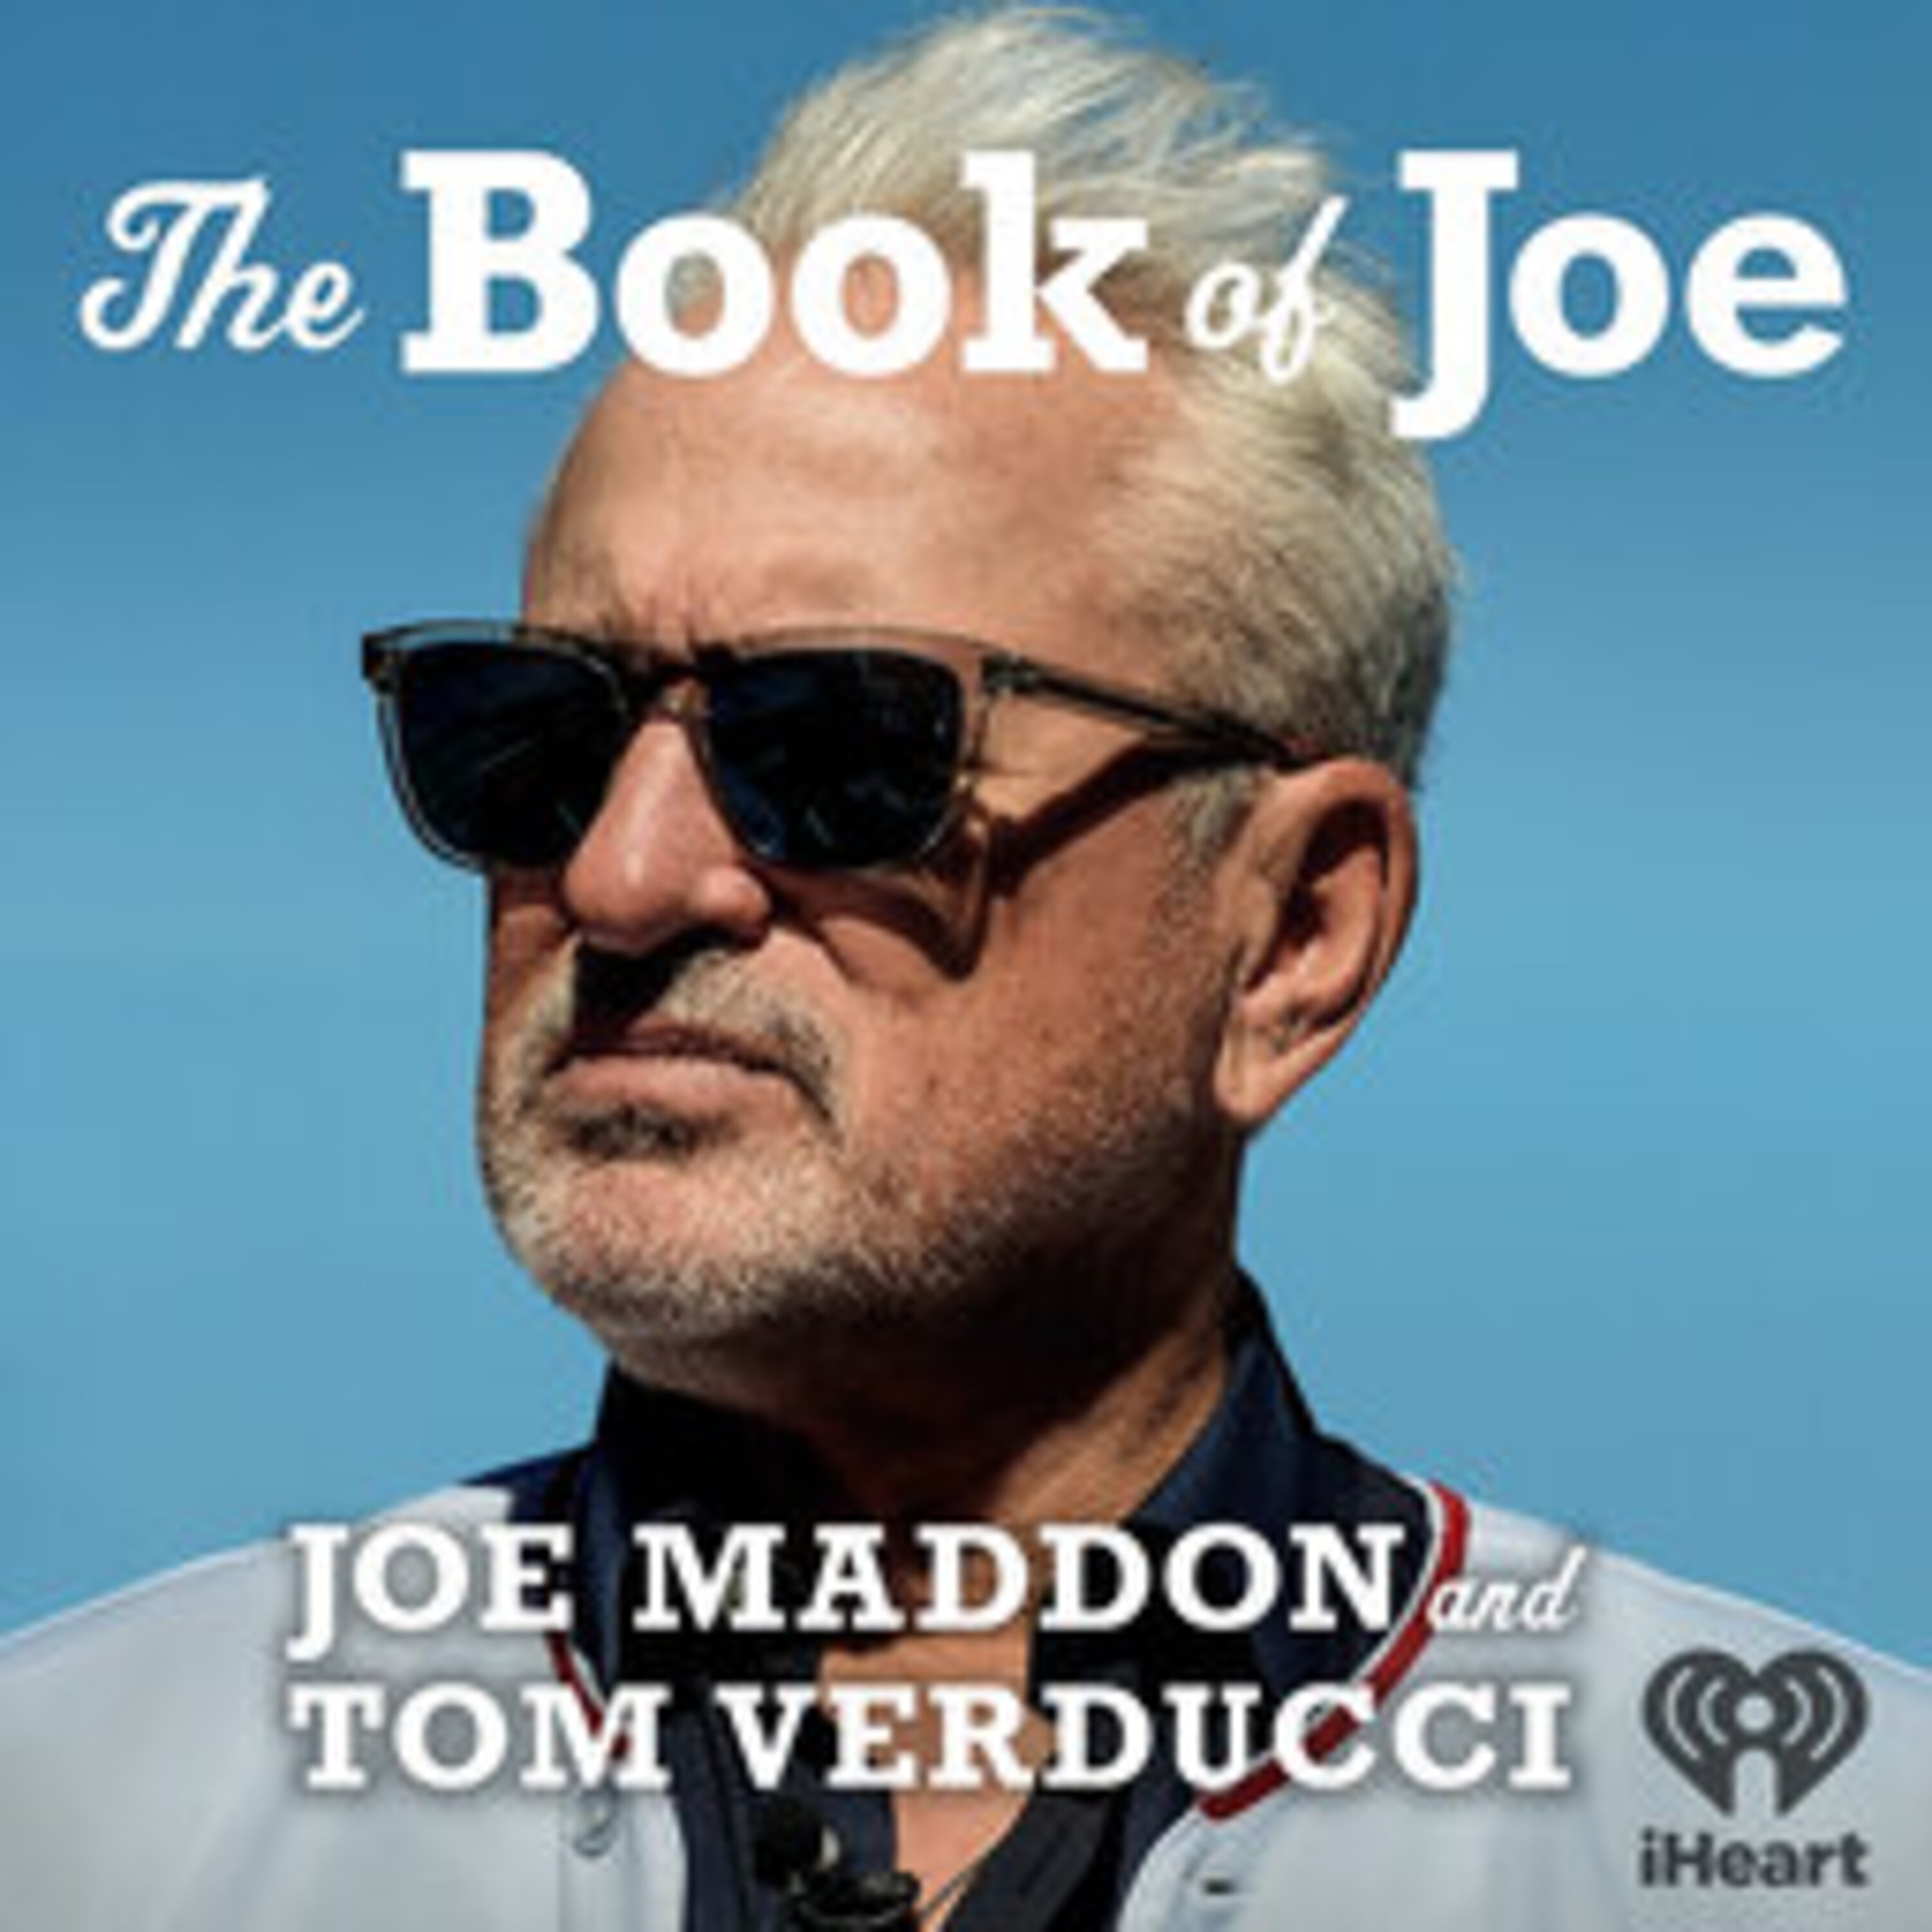 The Book of Joe: Umpires and The Allman Brothers